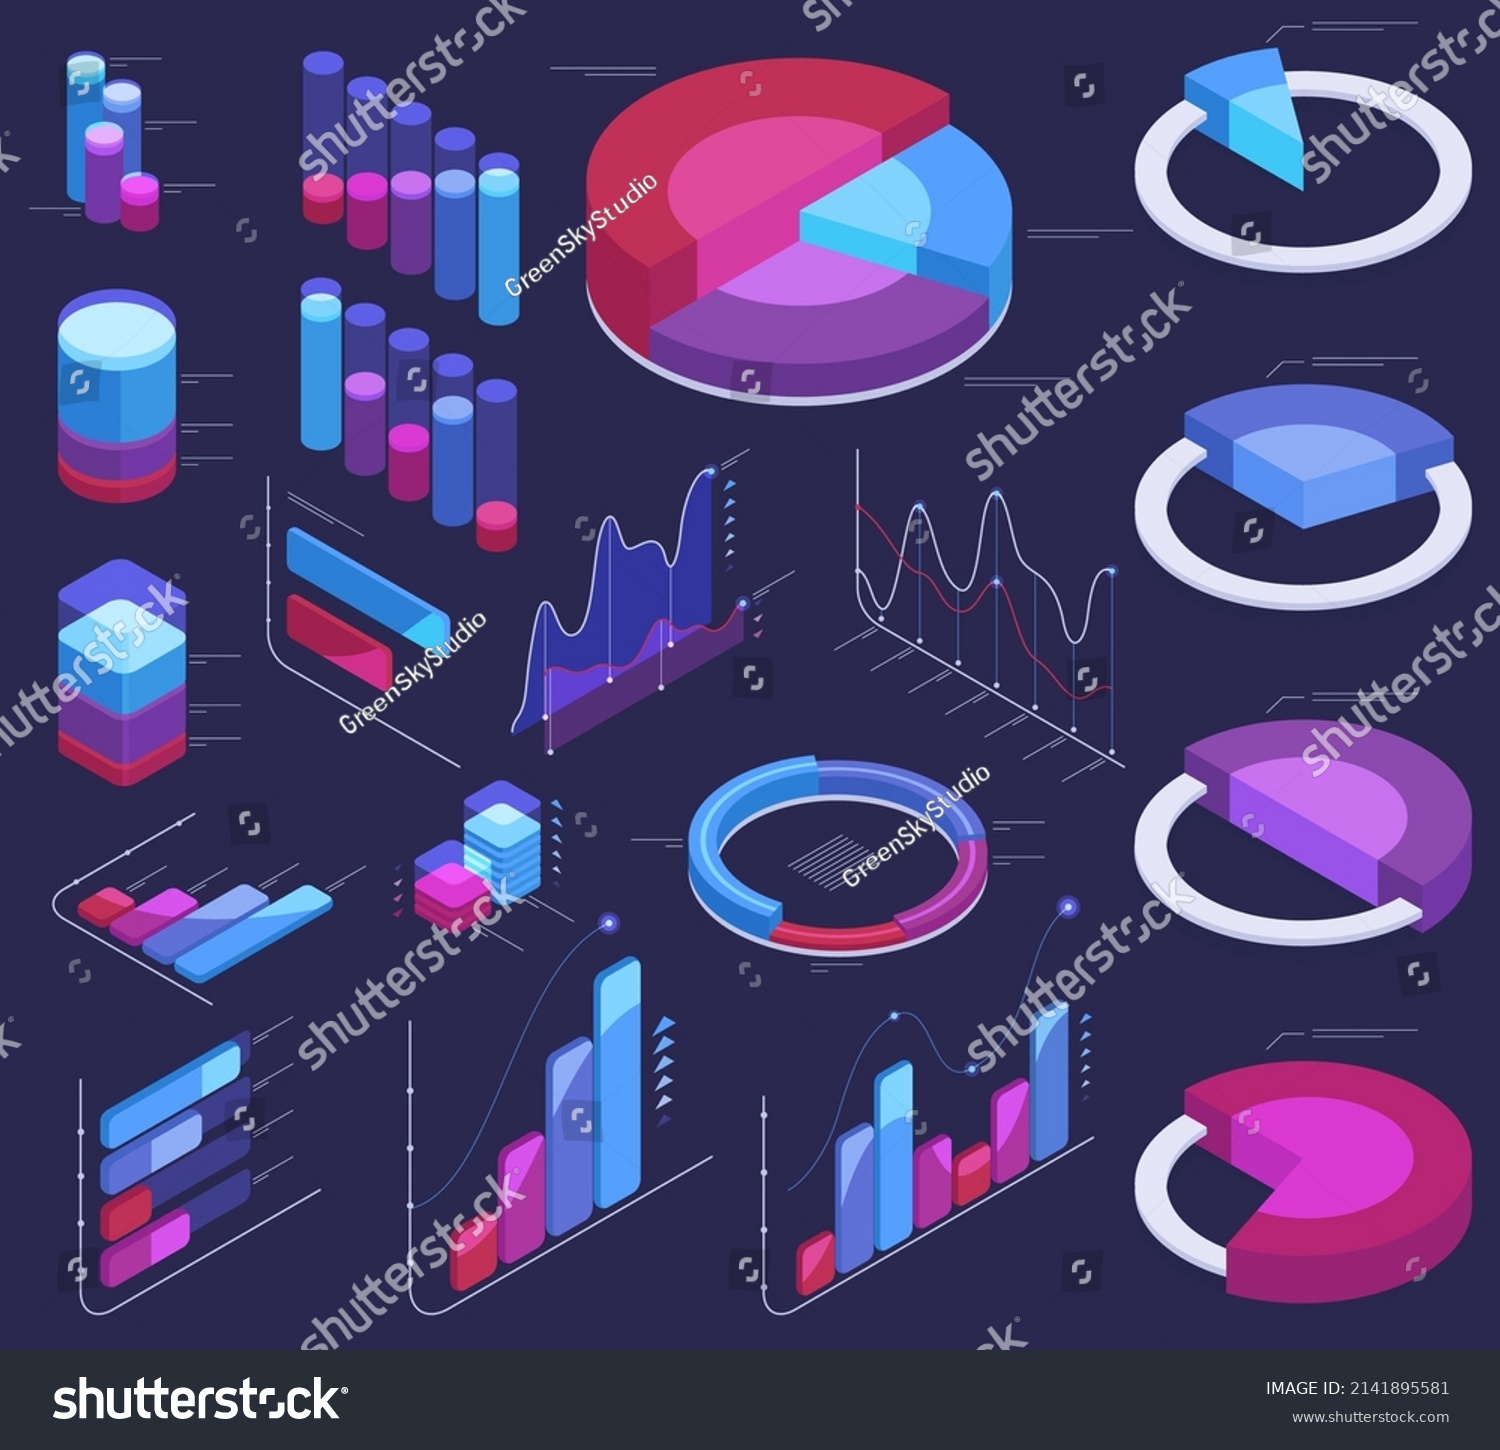 SVG of Isometric data analysis, 3d graphic chart infographic elements. Visual dashboard futuristic charts, statistic diagram vector symbols illustrations set. Business charts elements svg